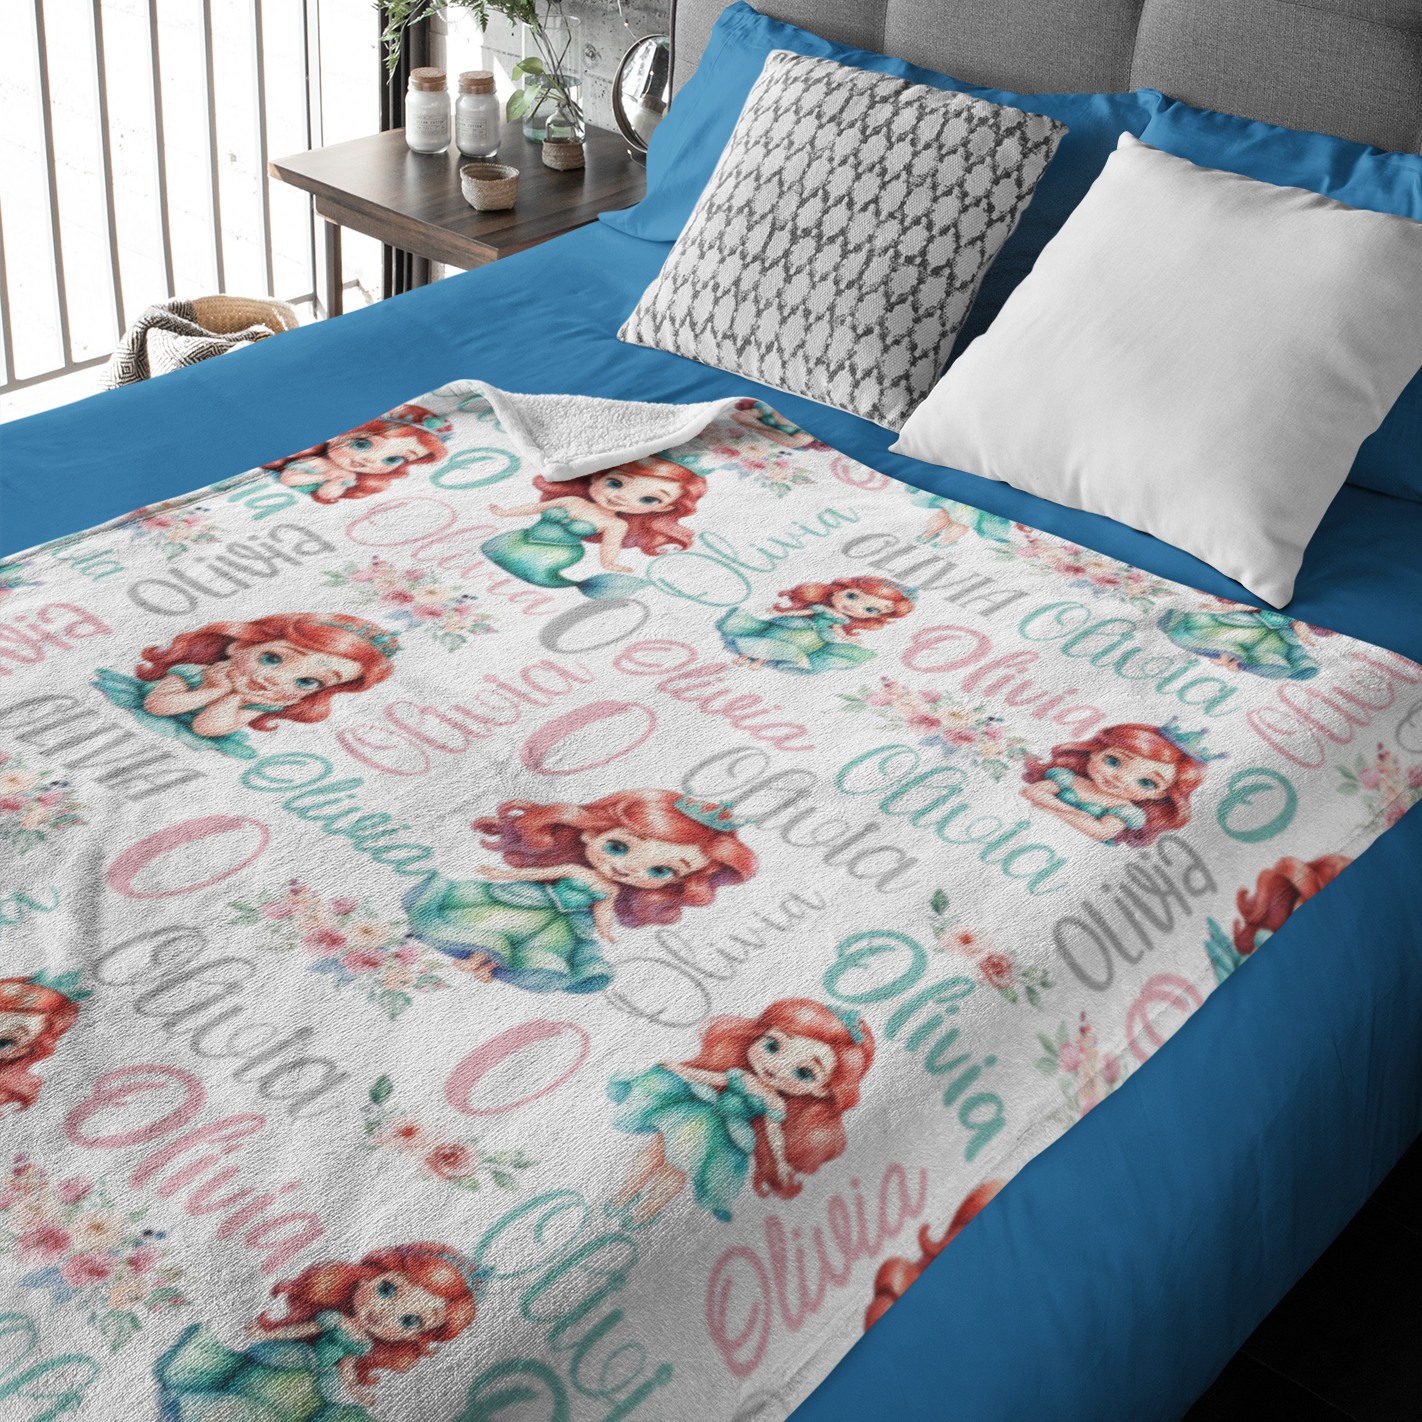 Personalized Watercolor Girls Mermaid Name Blanket - Gifts for Kids